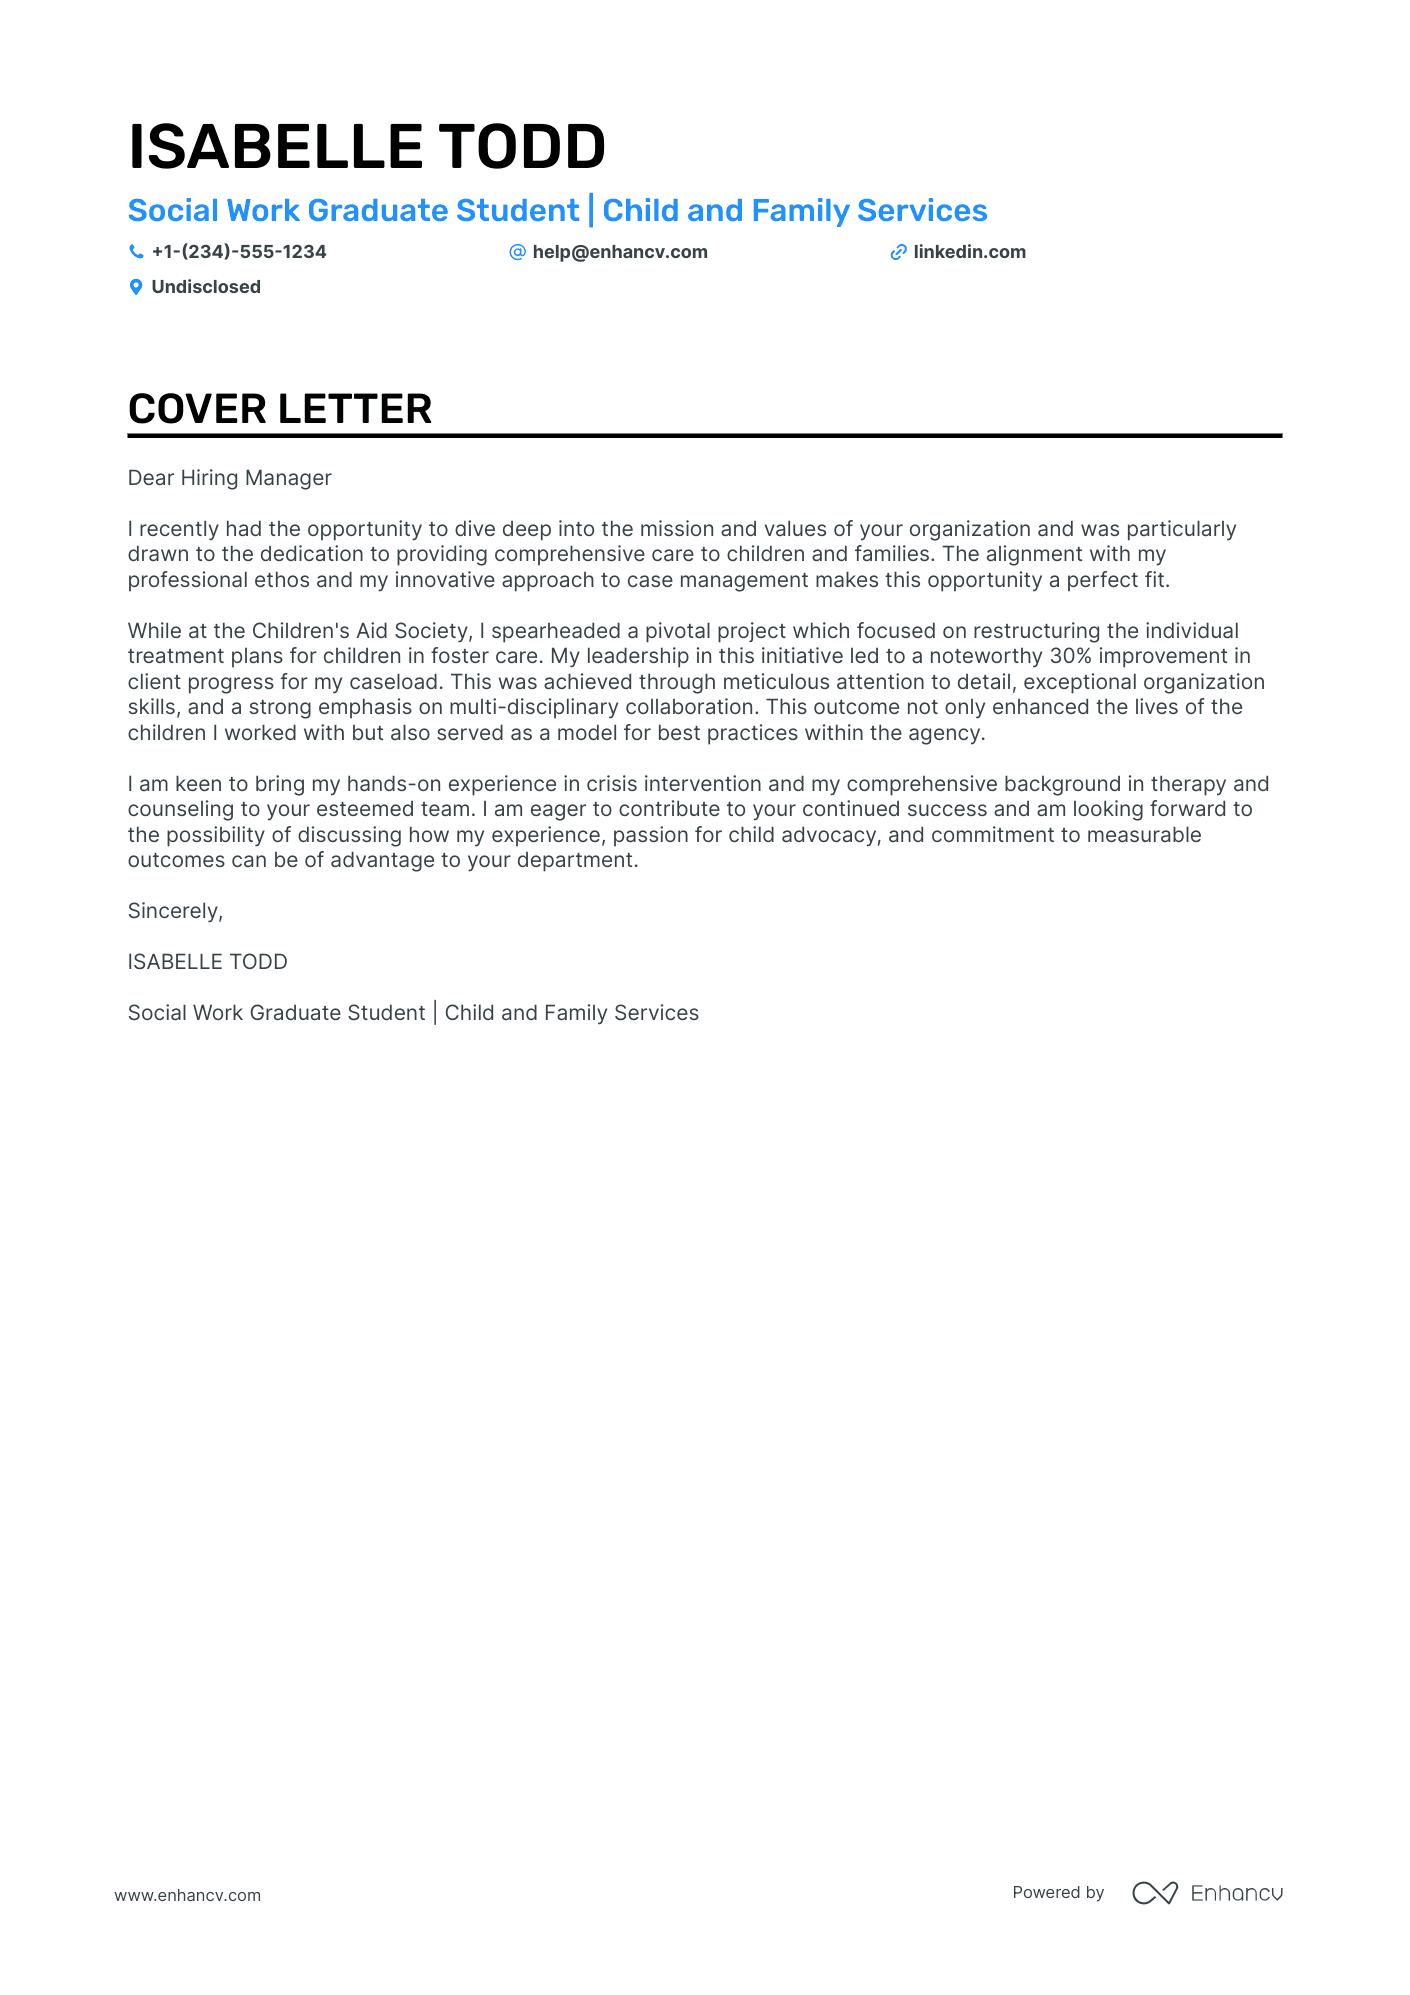 application letter of a social worker